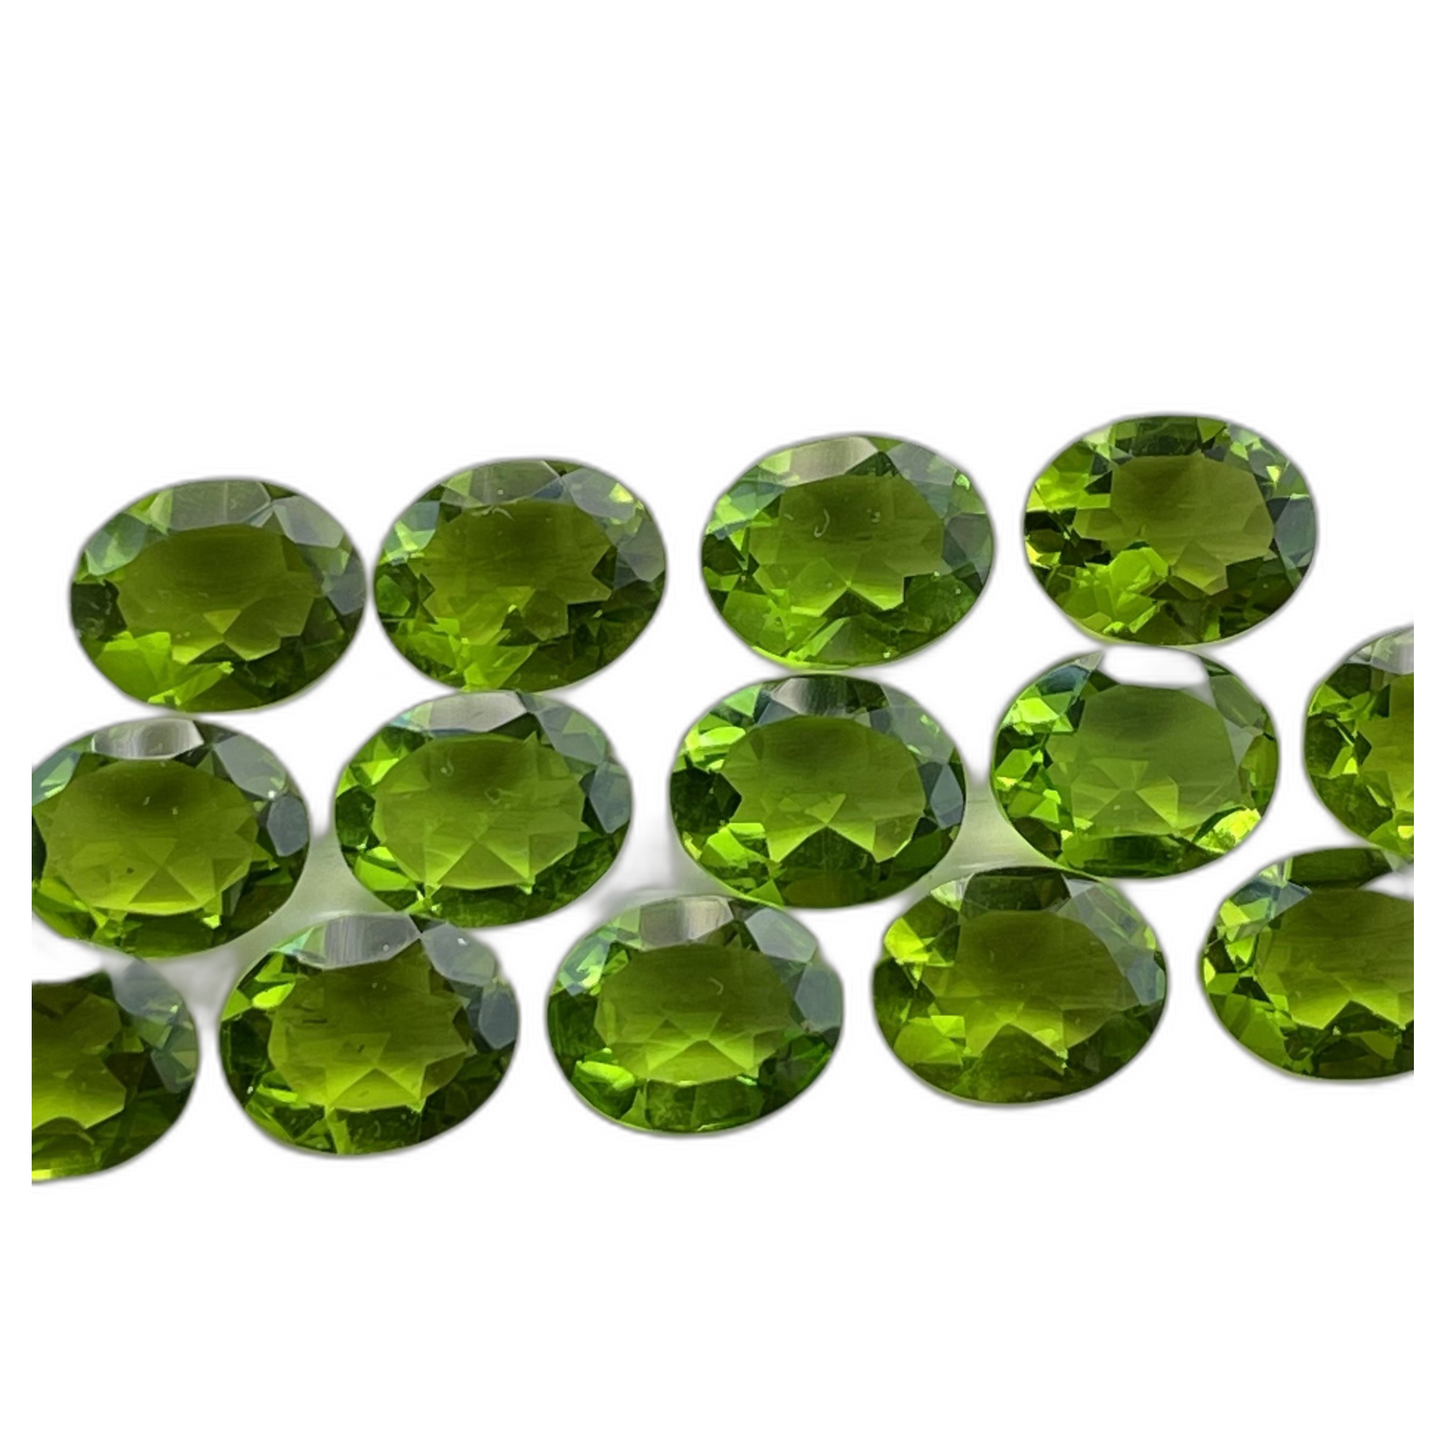 Peridot Faceted Nice Quality (8-10 mm) Oval Shape